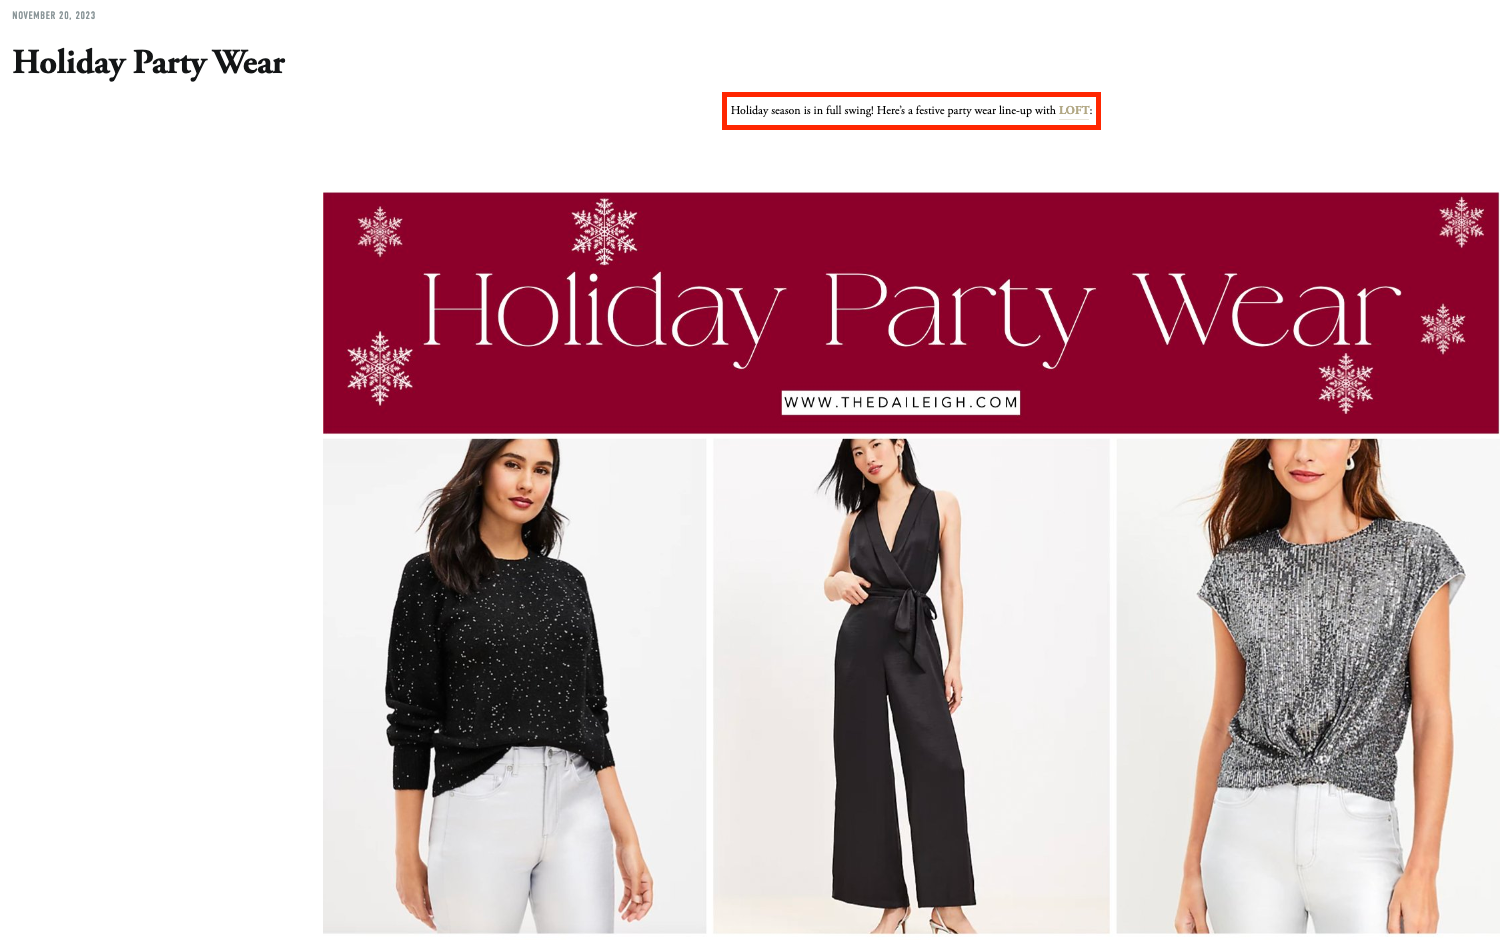 Holiday party wear newsletter featuring LOFT affiliate links